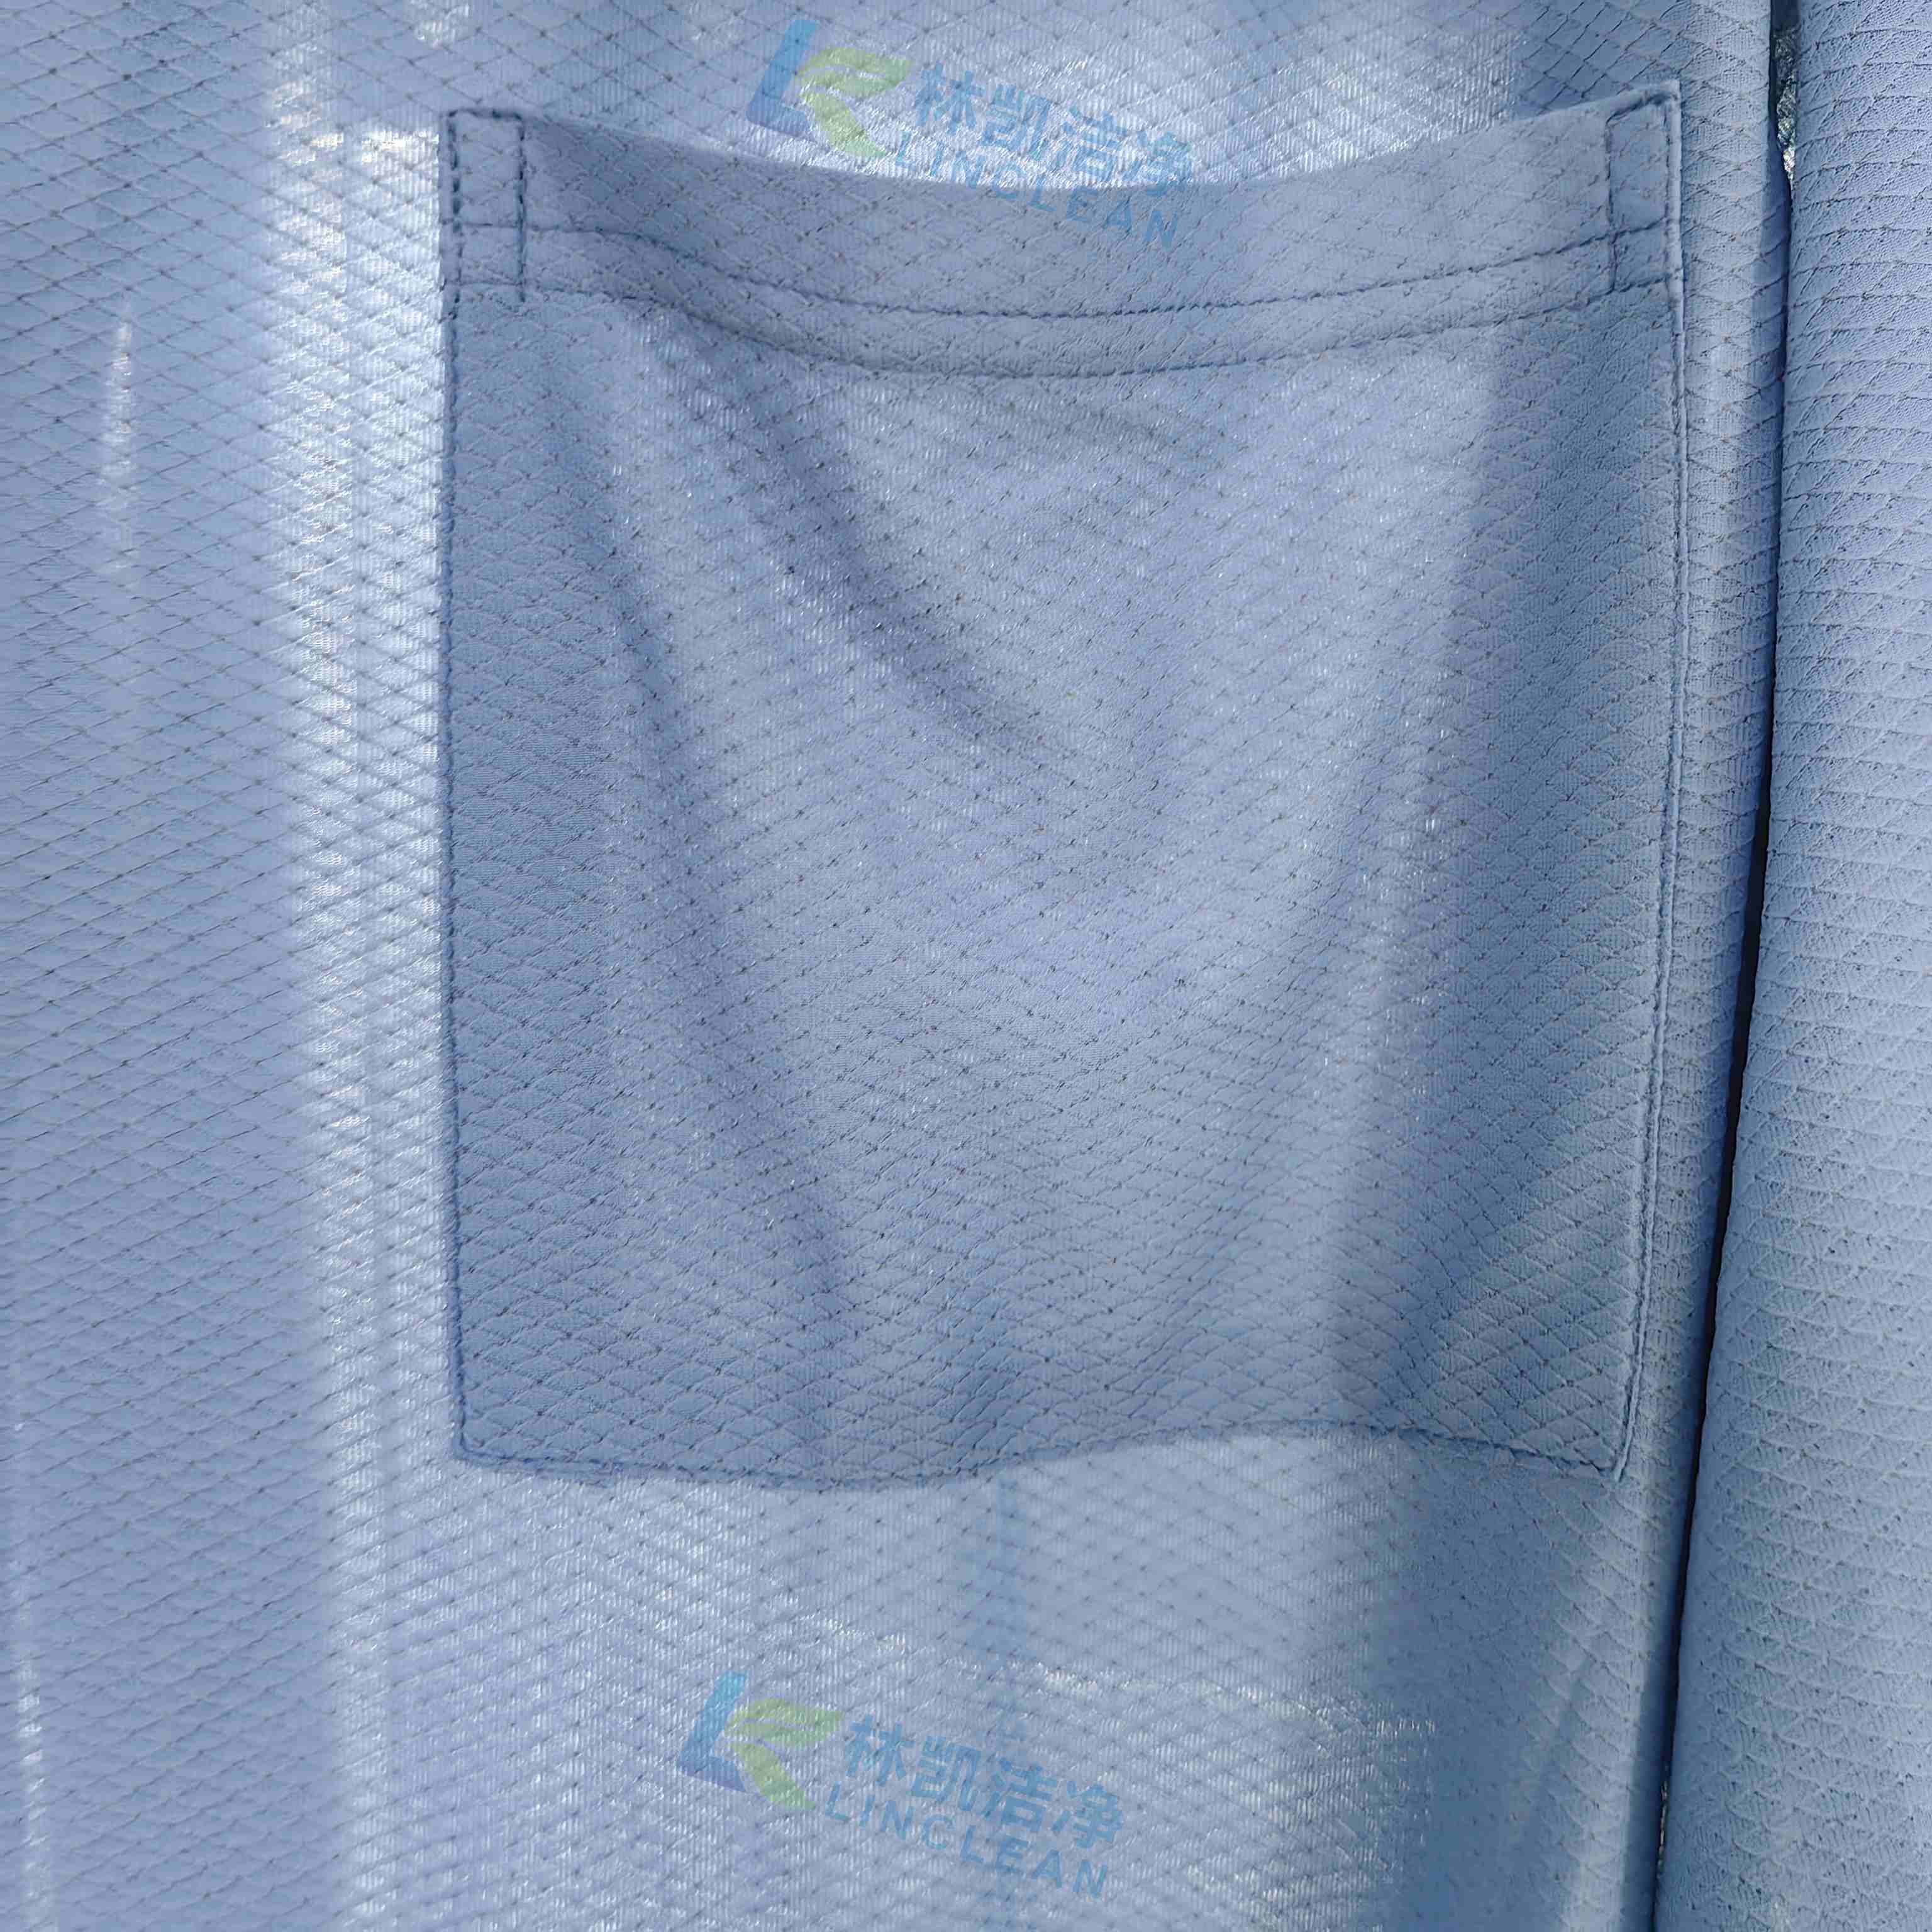 Polyester Labcoat Comfortable Antistatic Conductive Cleanroom ESD Uniform